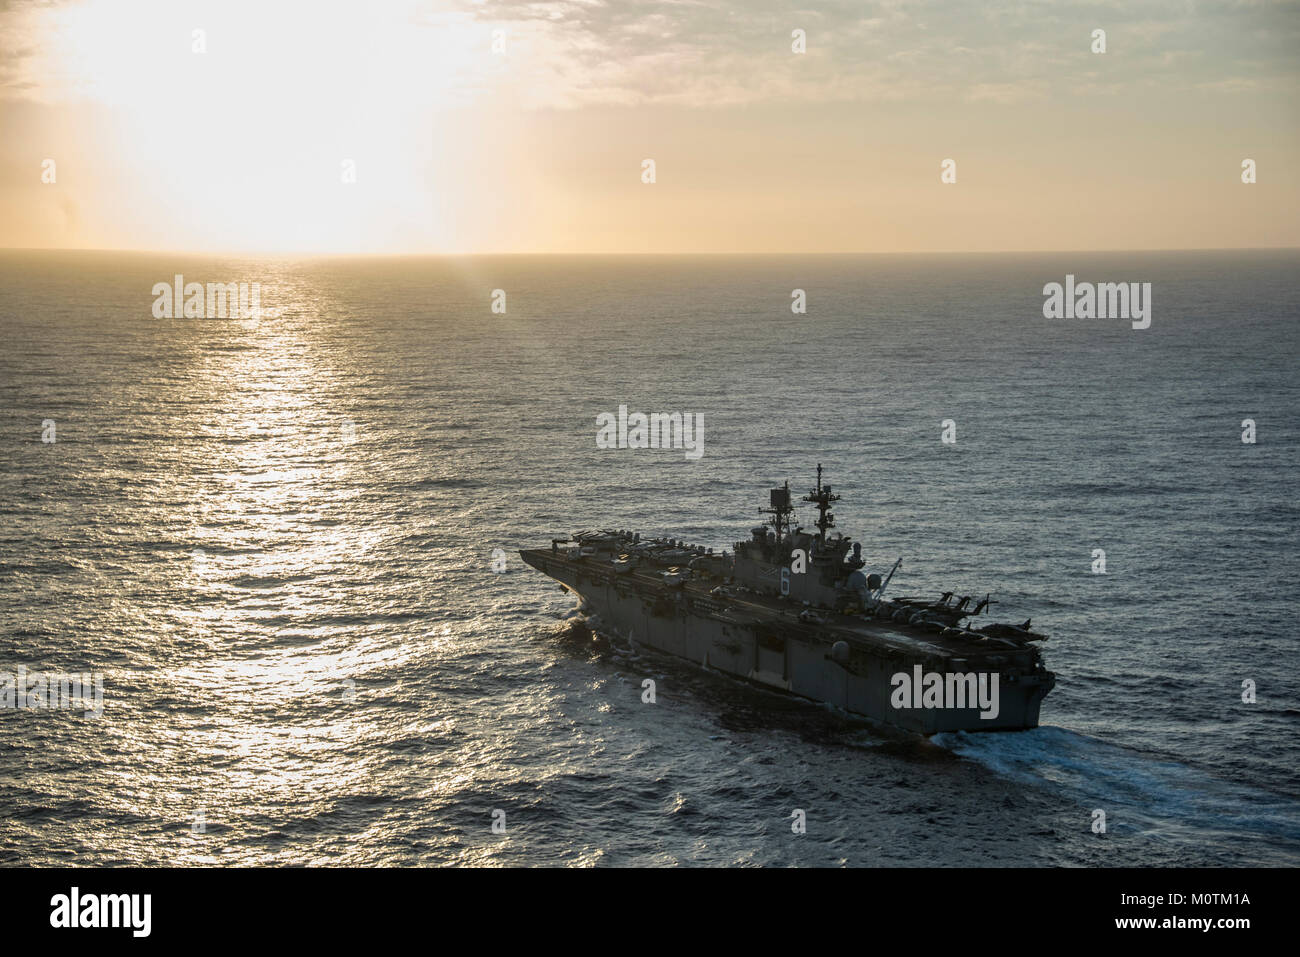 Amphibious assault ship USS America (LHA 6) transits the Pacific Ocean near Nimitz-class aircraft carrier USS Carl Vinson (CVN 70). Carl Vinson Strike Group is currently operating in the Pacific as part of a regularly scheduled deployment. Stock Photo